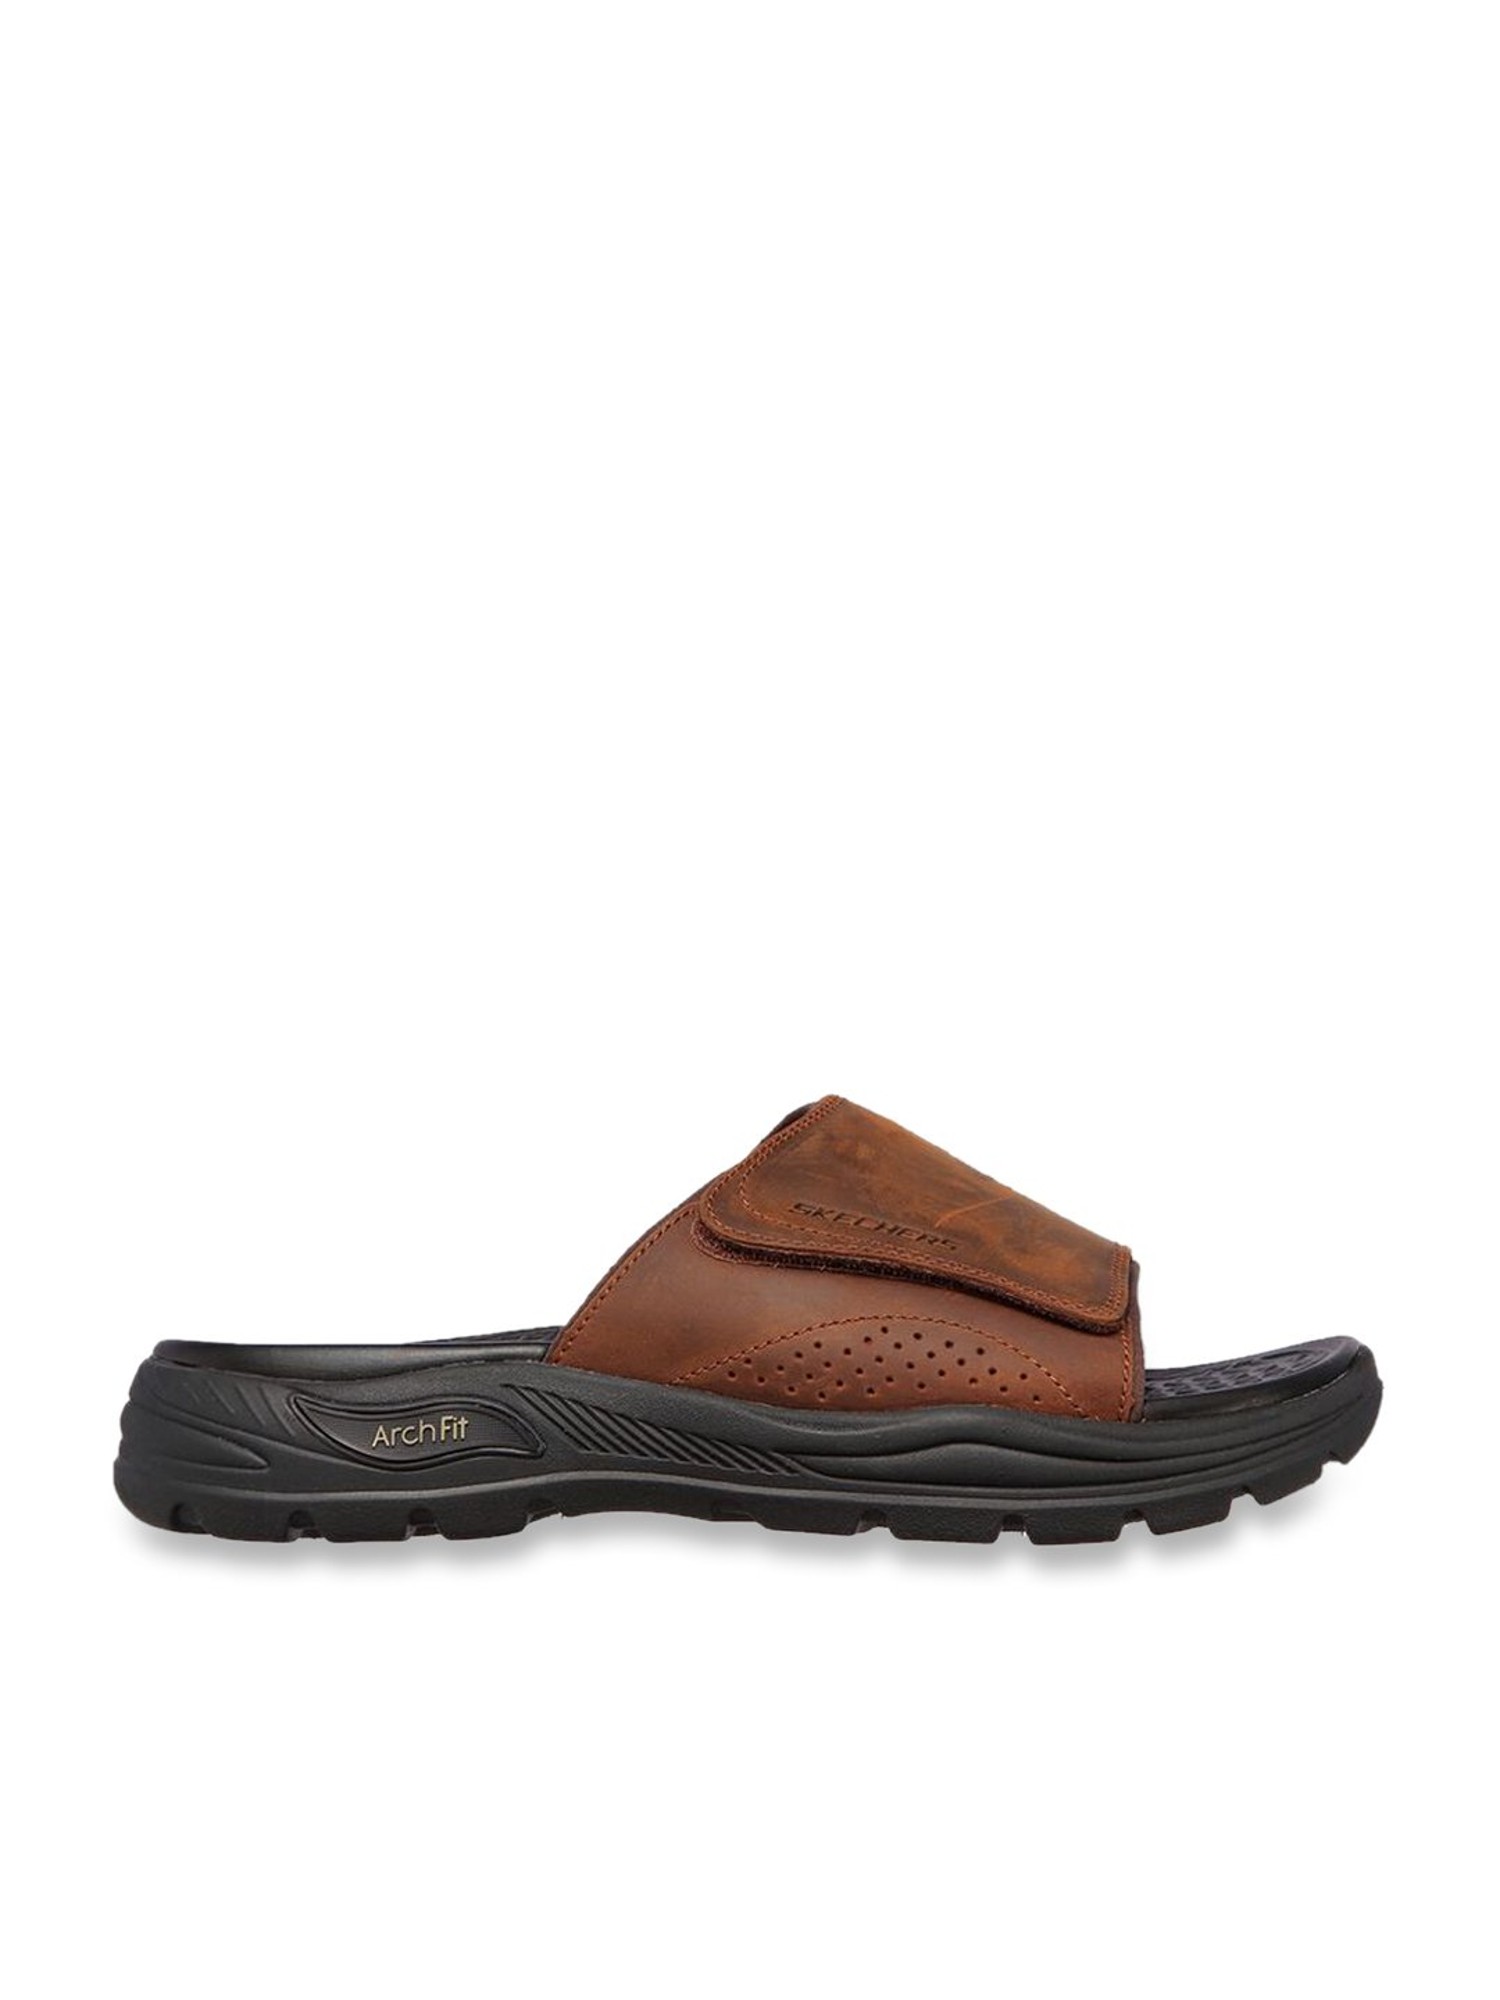 SKECHERS ARCHFIT BEACH KISS B Black Sandals Buy SKECHERS ARCHFIT BEACH  KISS B Black Sandals Online at Best Price in India  Nykaa